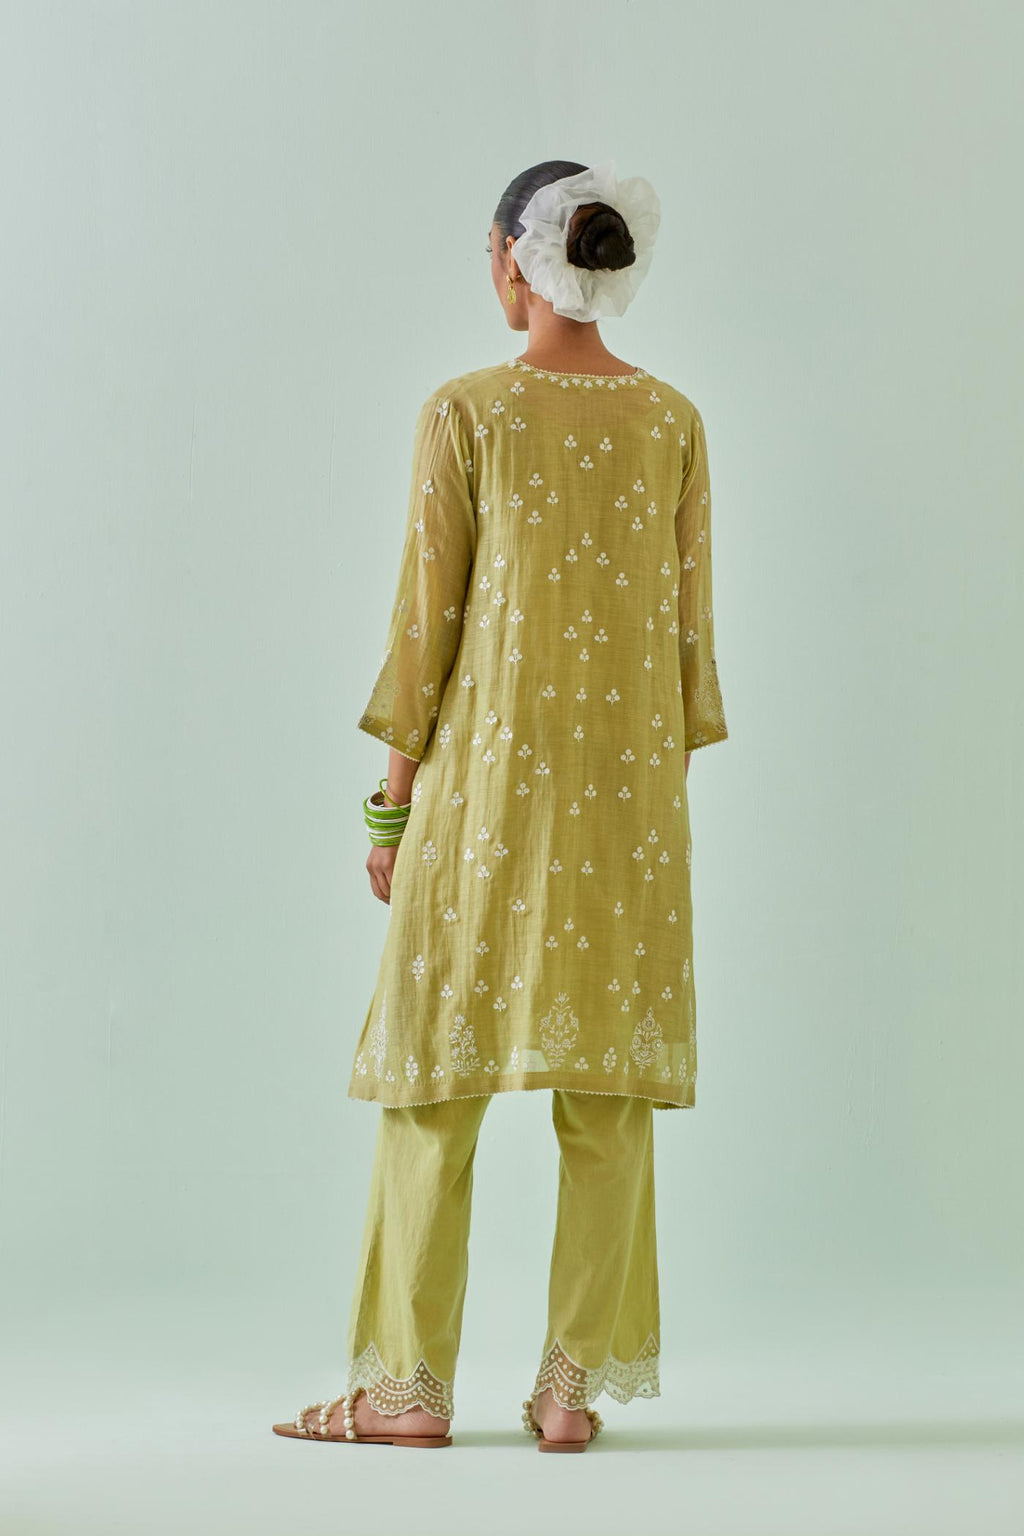 Green kalidar cotton chanderi short kurta set, highlighted with delicate off-white embroidery.